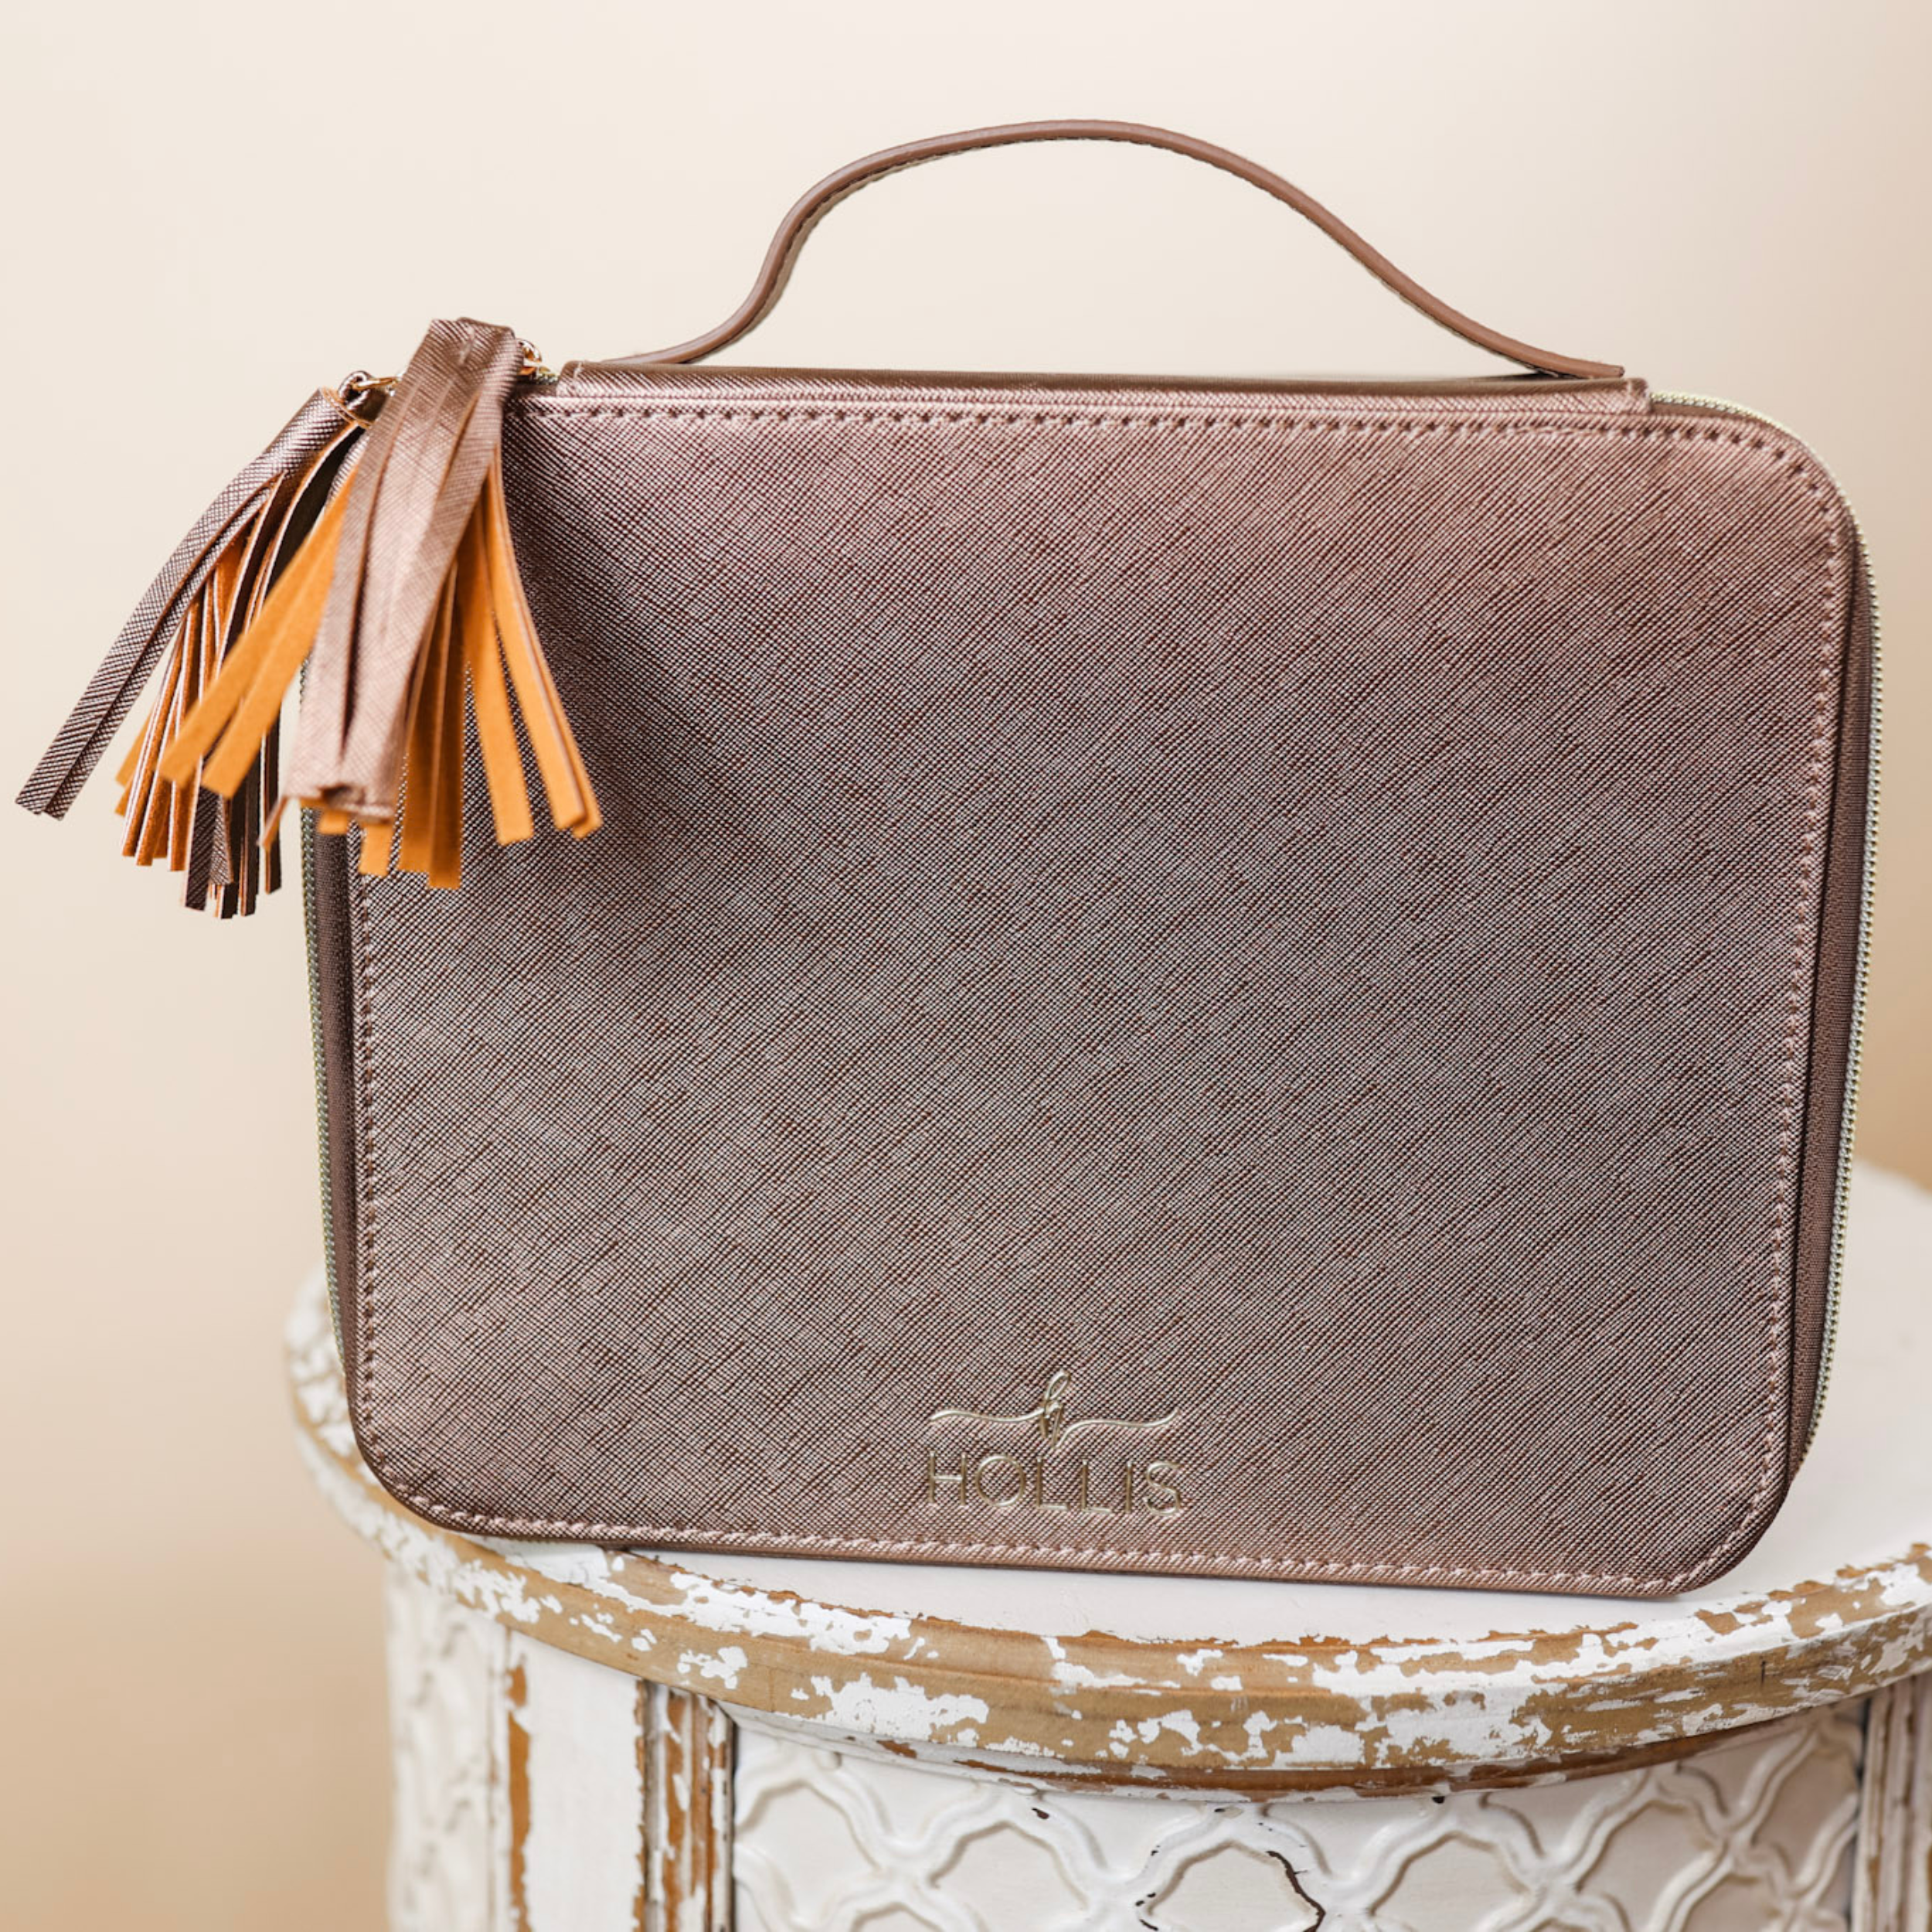 A mocha metallic bag with a handle and fringe is sitting in the center of the picture. Background is tan. 